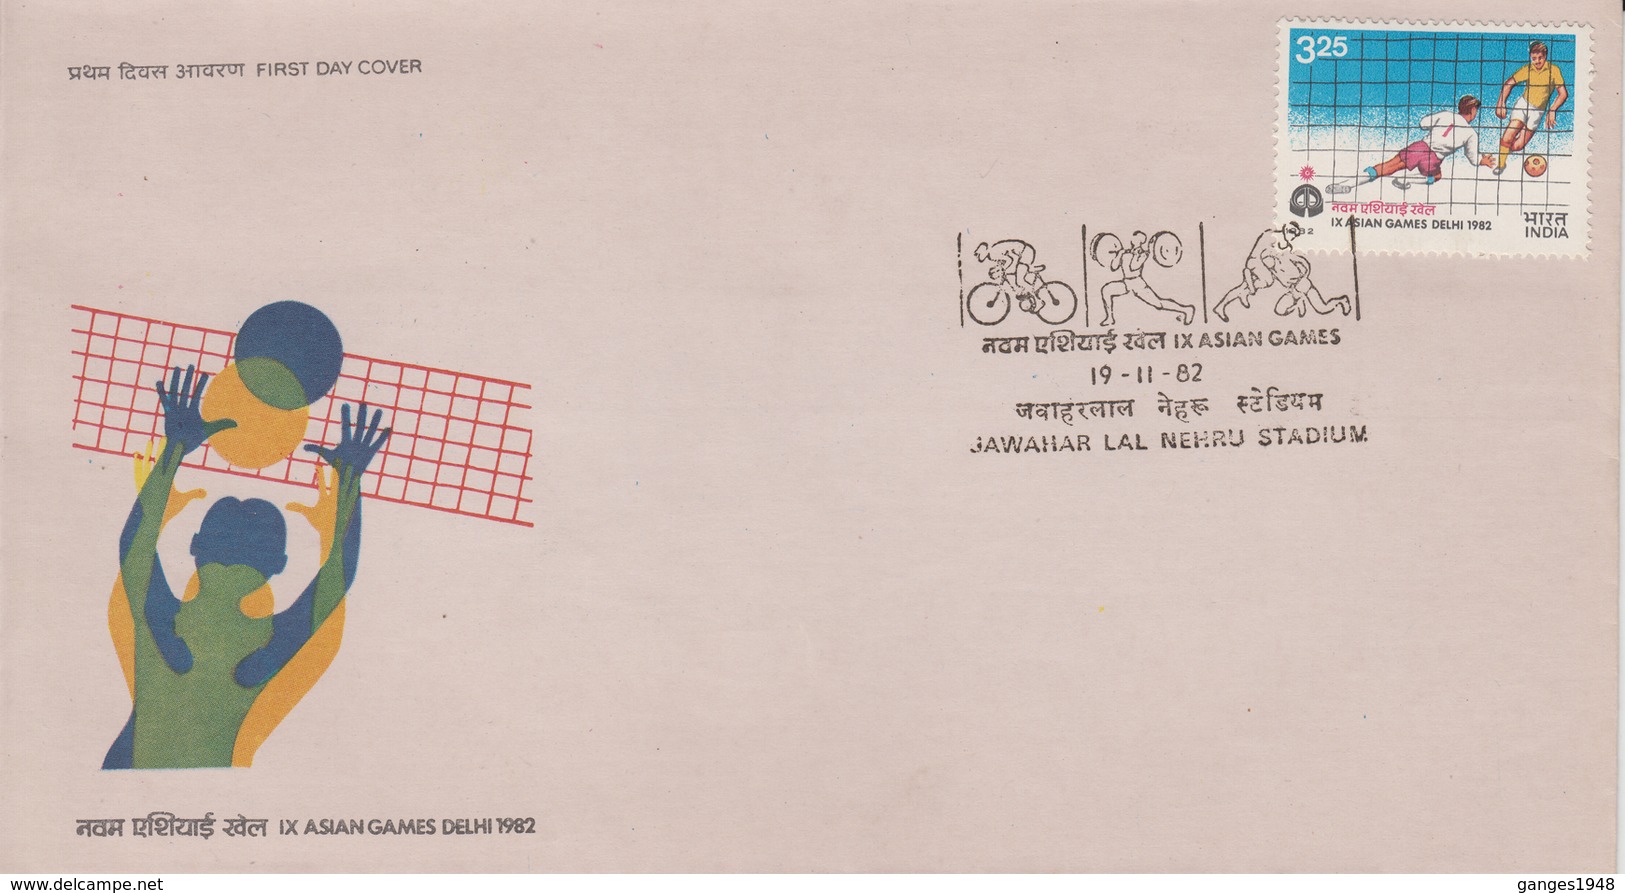 India 1982 Asian Games Football FDC  Cycling  Weight Lifting  Wrestling  Cancellation # 71025 Inde India Indien - Cycling